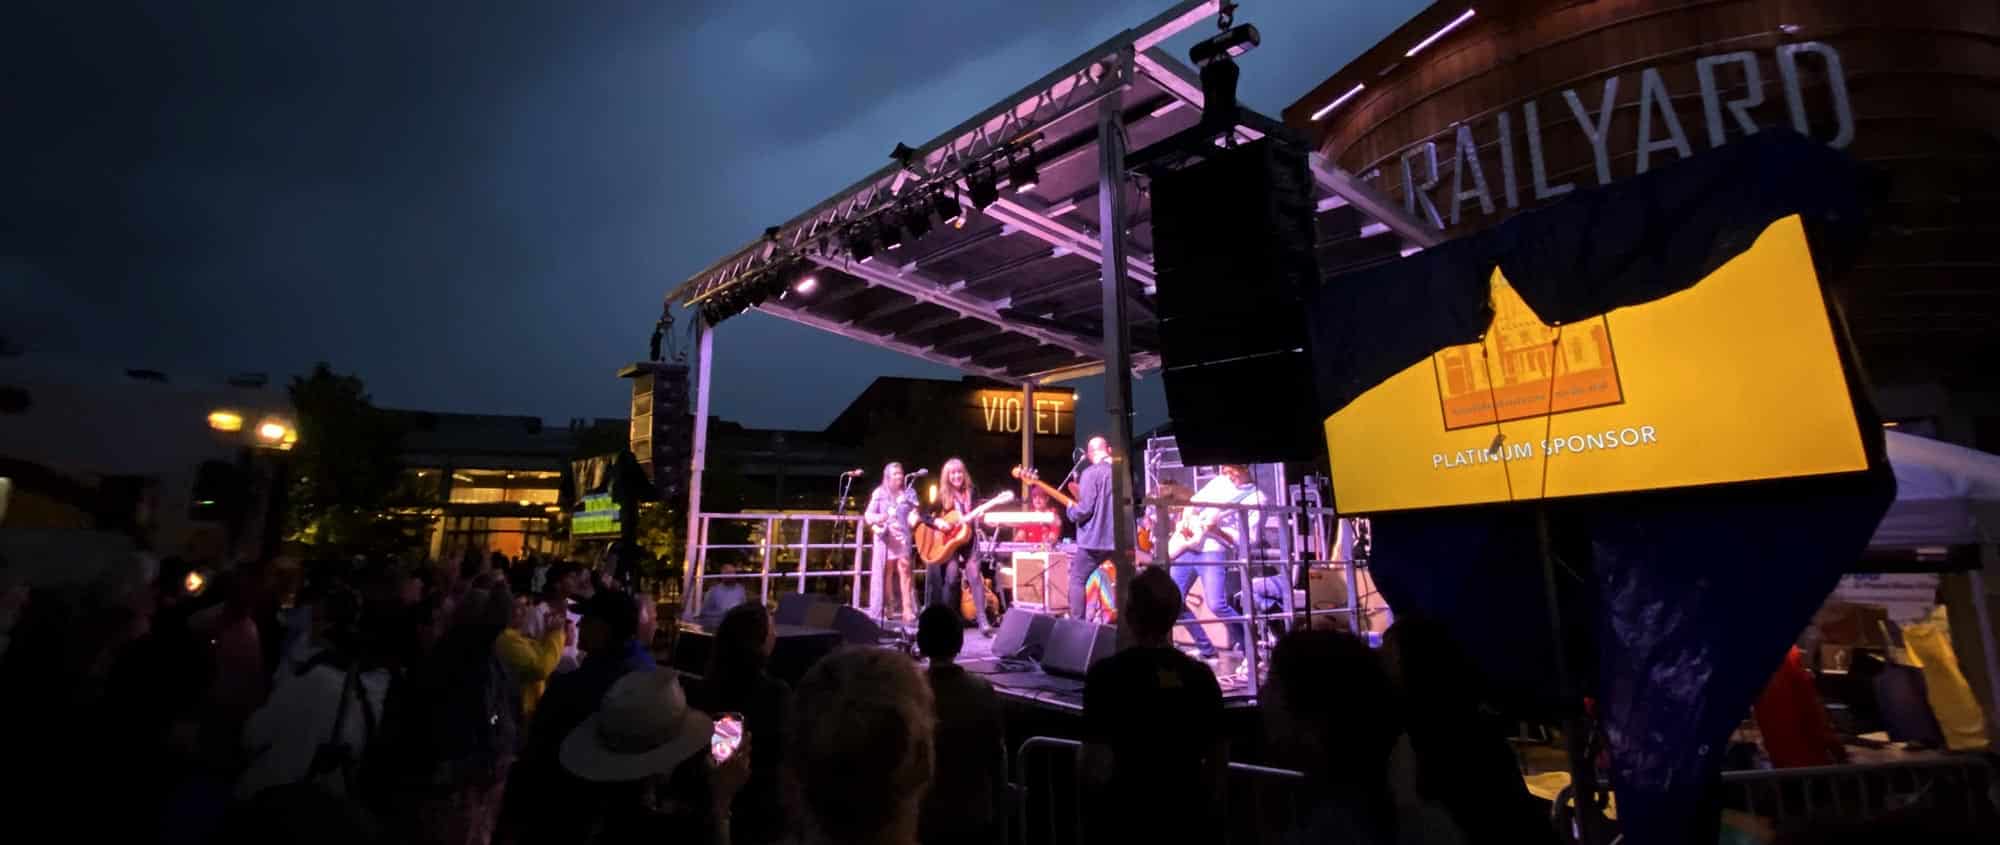 A lit stage with musicians in the Railyard.